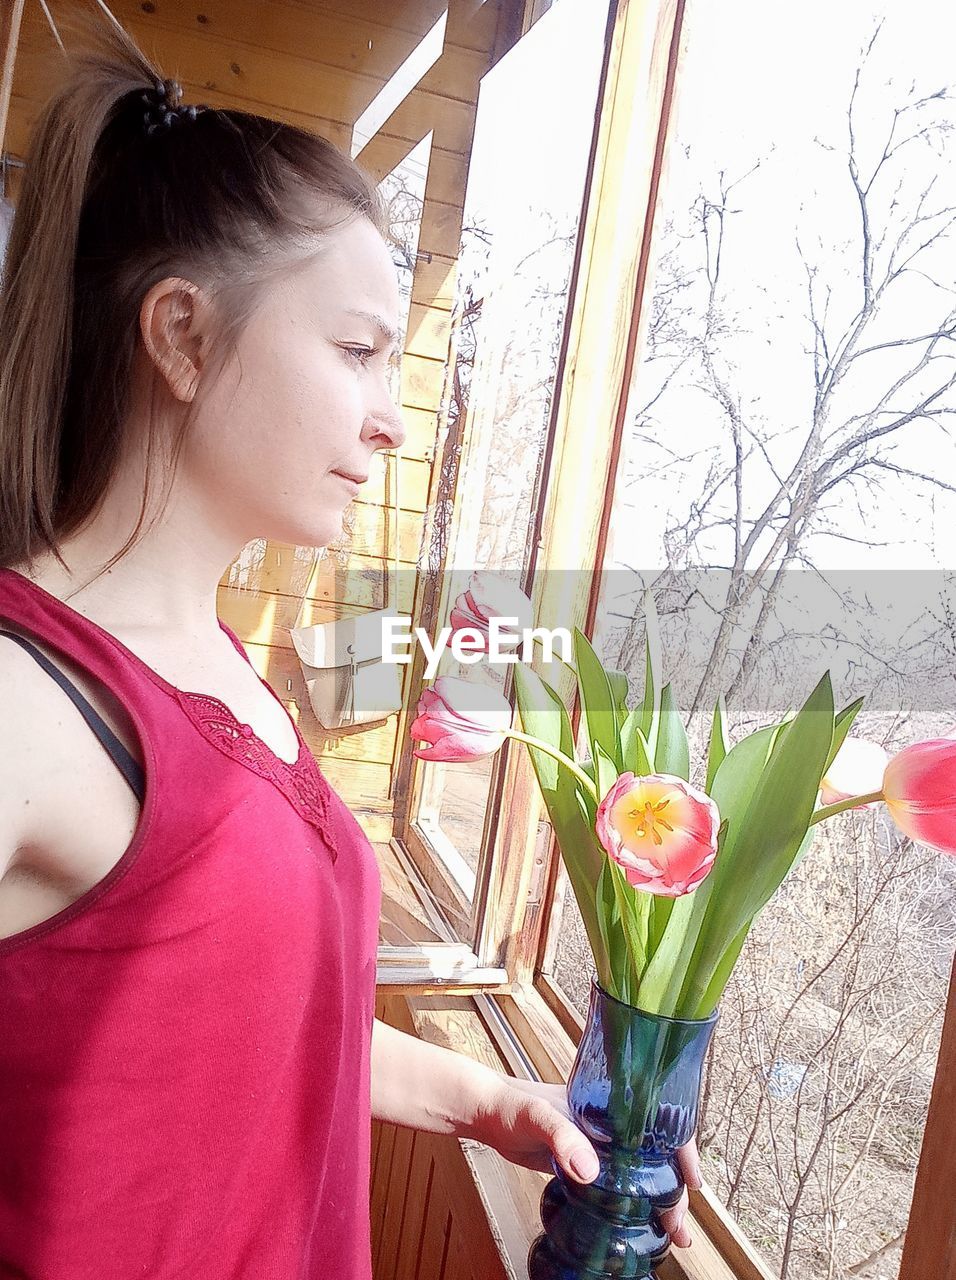 YOUNG WOMAN LOOKING DOWN WHILE HOLDING FLOWER